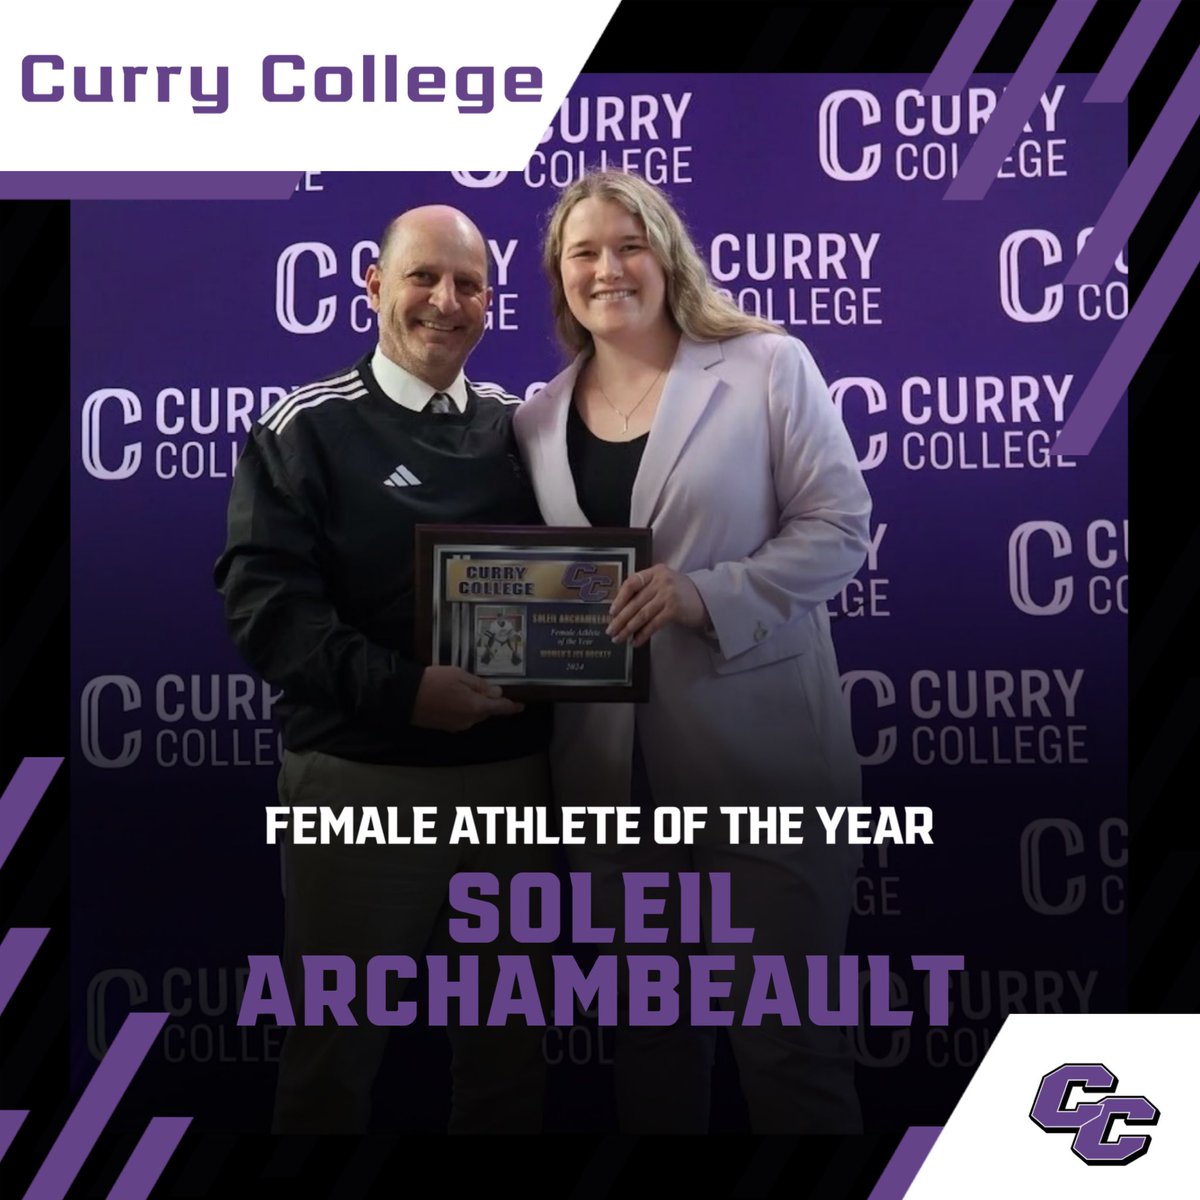 Belated congratulations to Soleil Archambeault for being named @CurryEdu Female Athlete of the Year! Slay finished 13th in the NCAA for save percentage (0.947), had 5 shutouts, 1 assist, and was @CCC_Sports goalie of the year. Congrats Slay! #BleedPPPurple